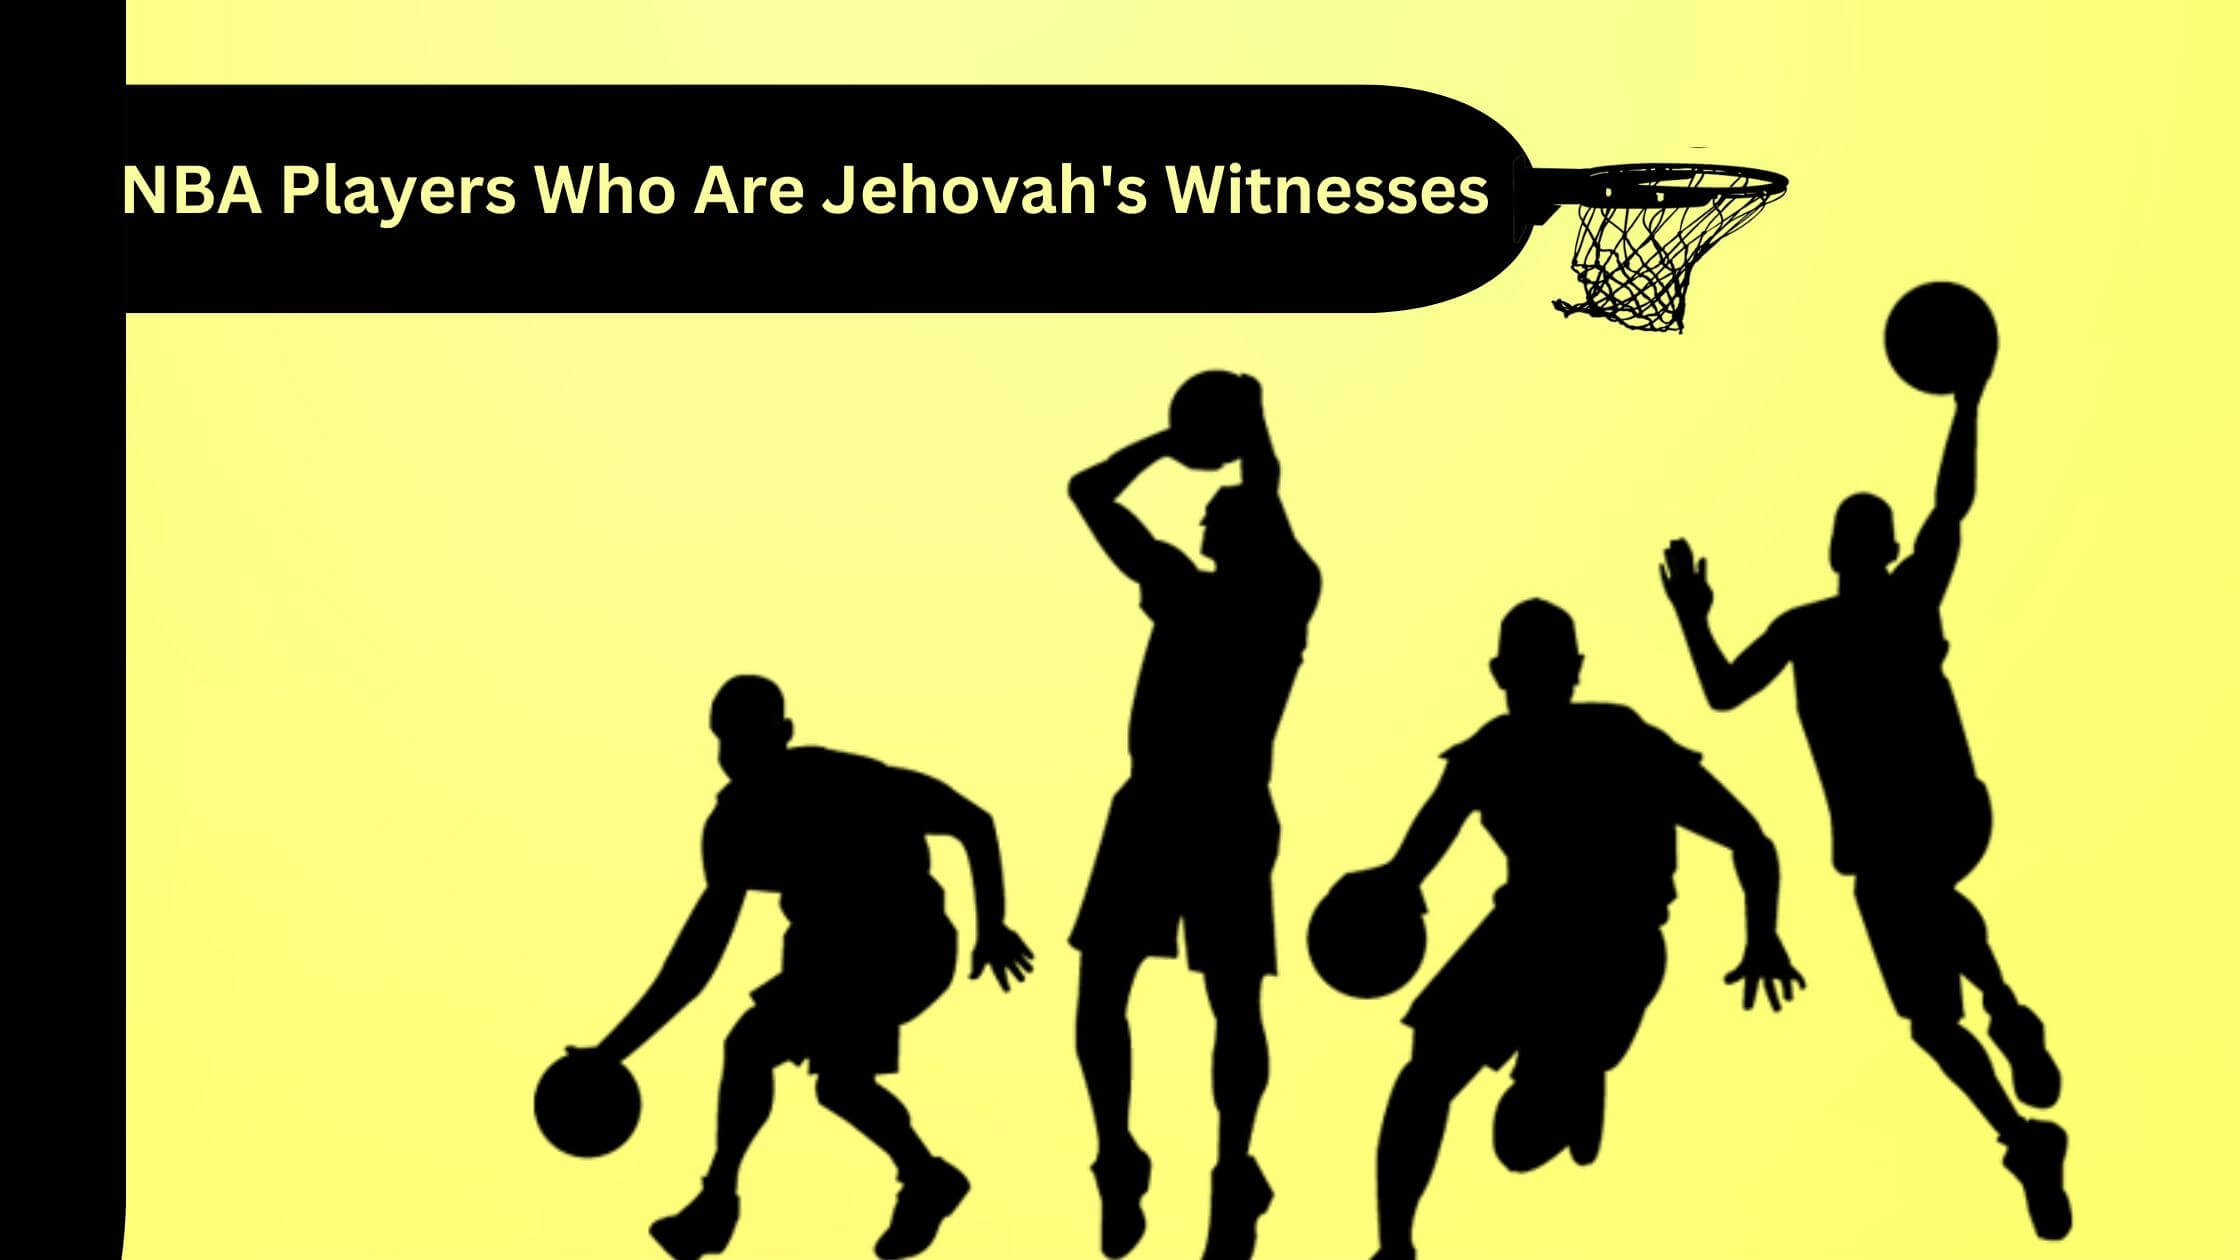 NBA Players Who Are Jehovah's Witnesses Complete Details